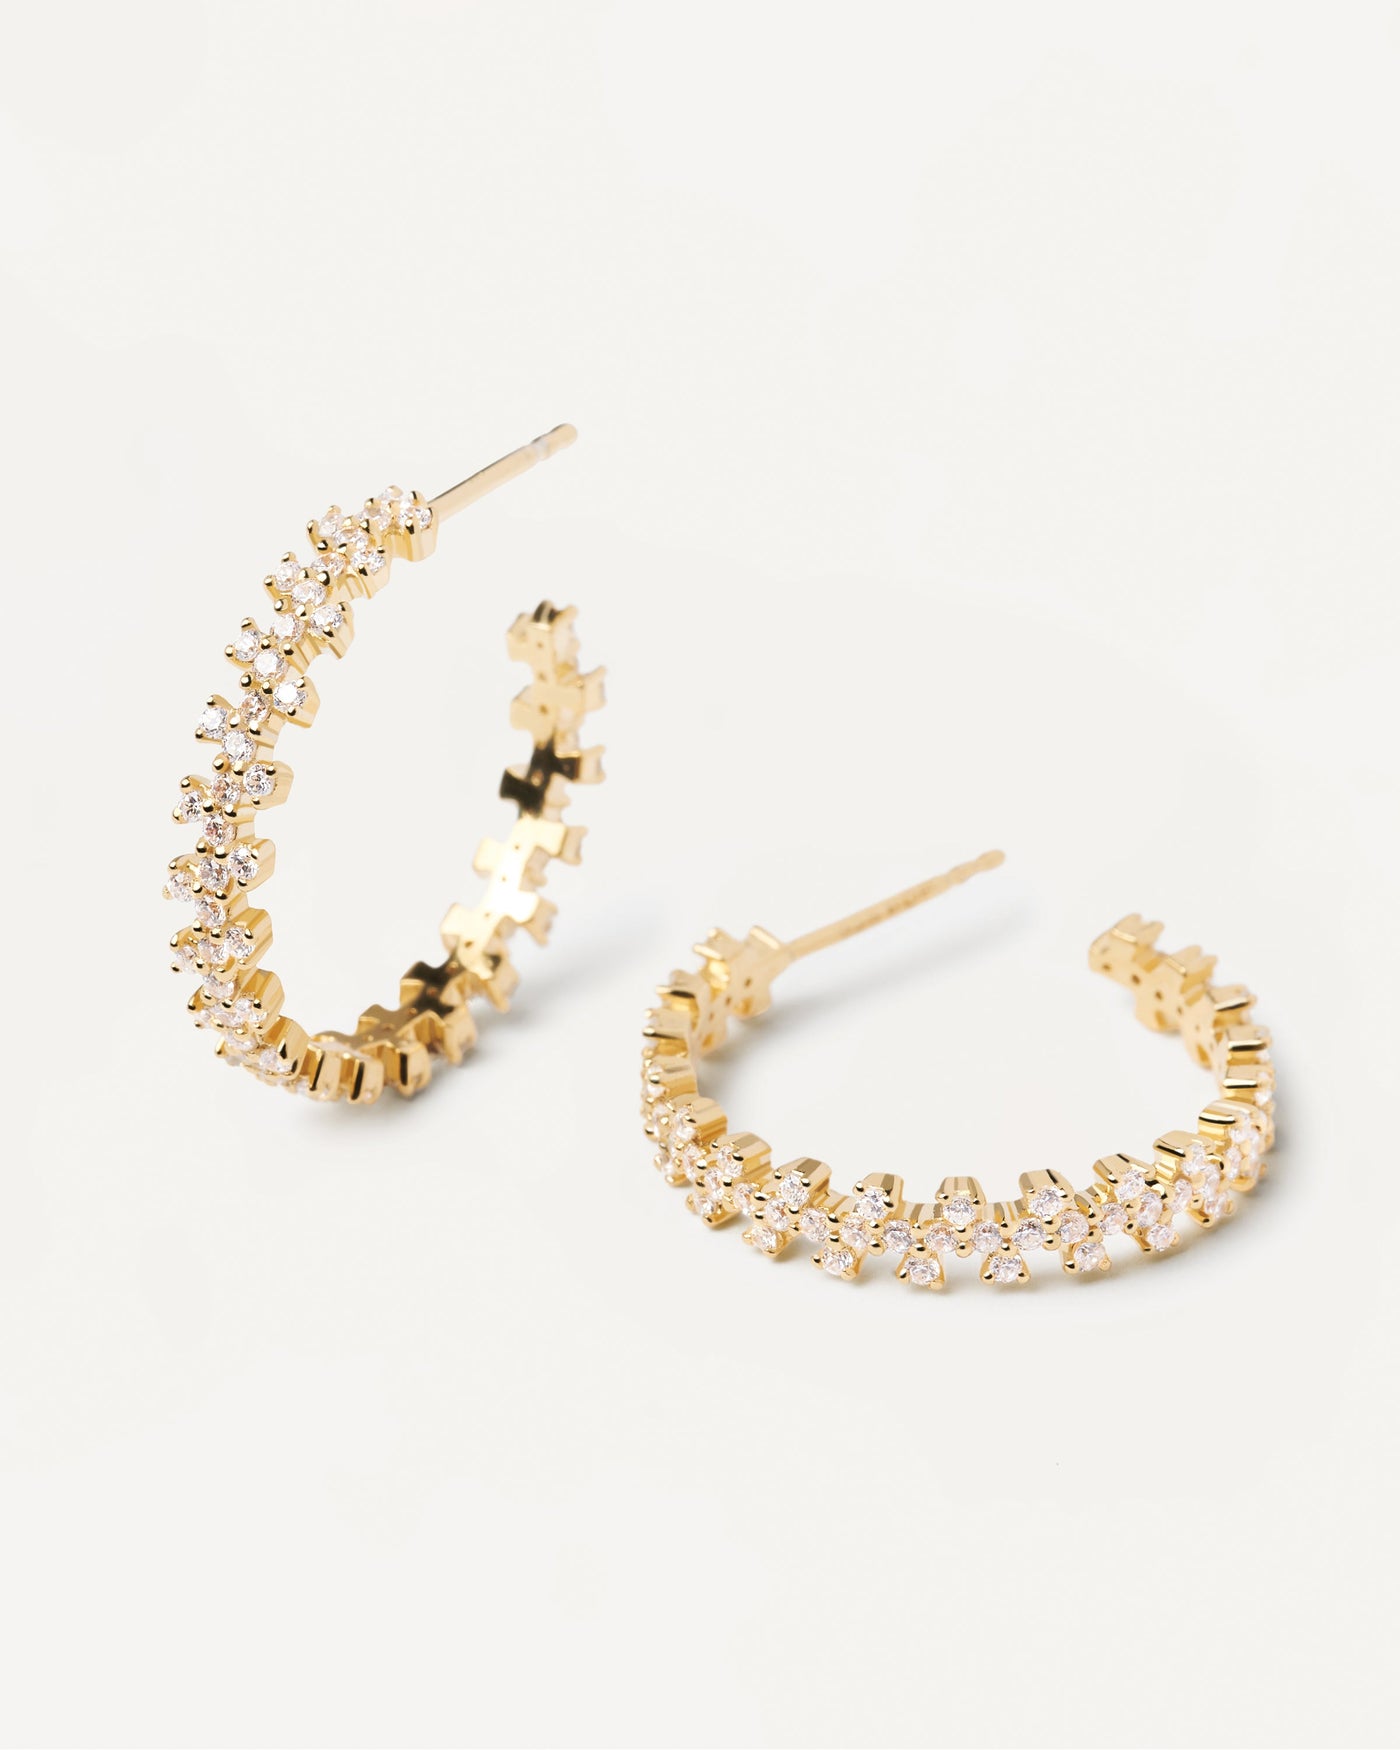 2023 Selection | Crown Earrings. Gold-plated hoop earrings with white zirconia. Get the latest arrival from PDPAOLA. Place your order safely and get this Best Seller. Free Shipping.